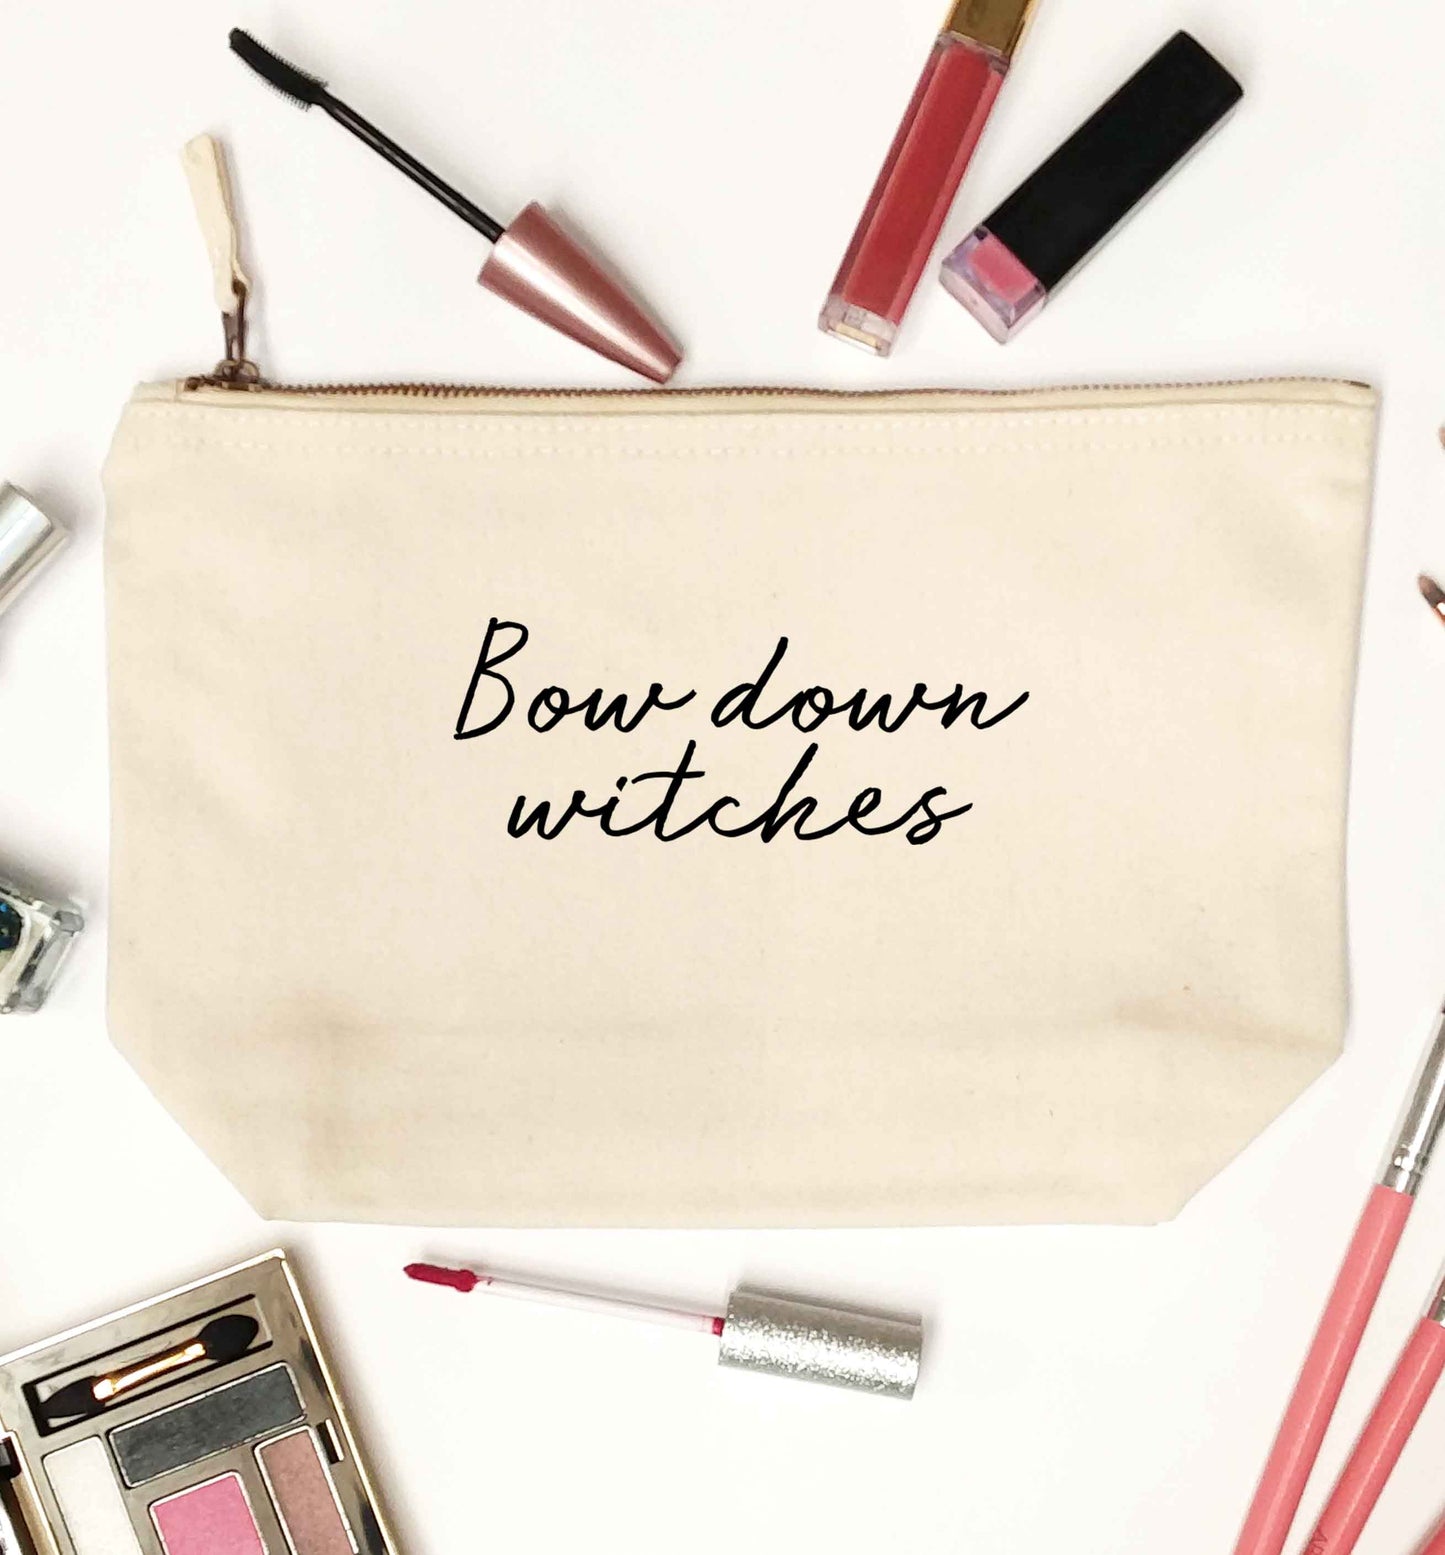 Bow down witches natural makeup bag